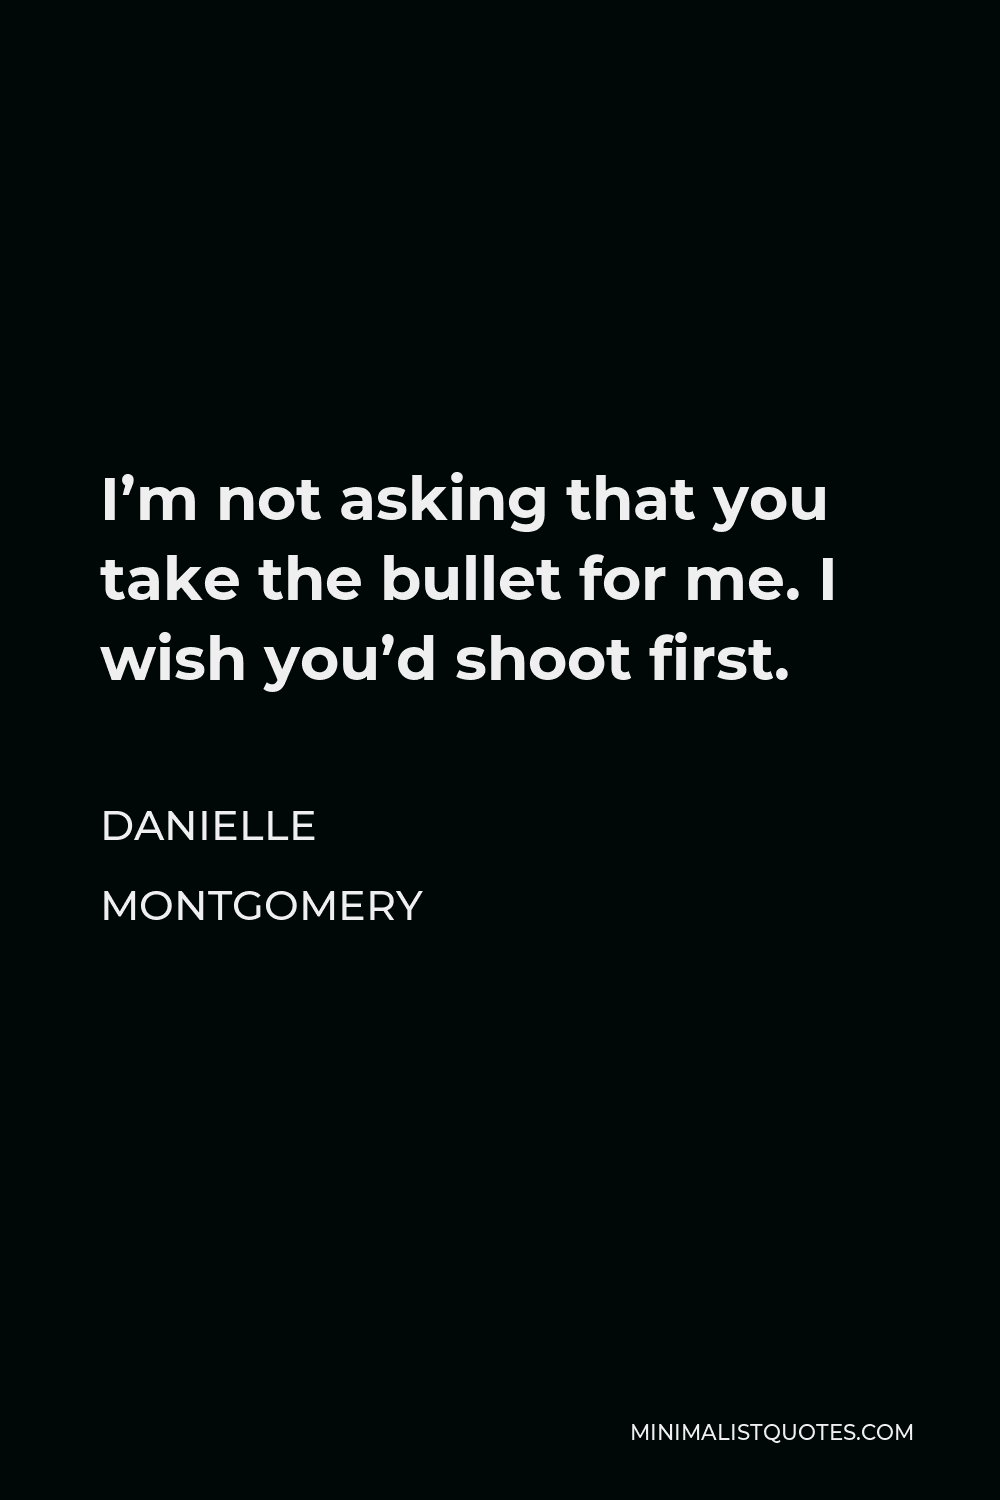 Danielle Montgomery Quote - I’m not asking that you take the bullet for me. I wish you’d shoot first.